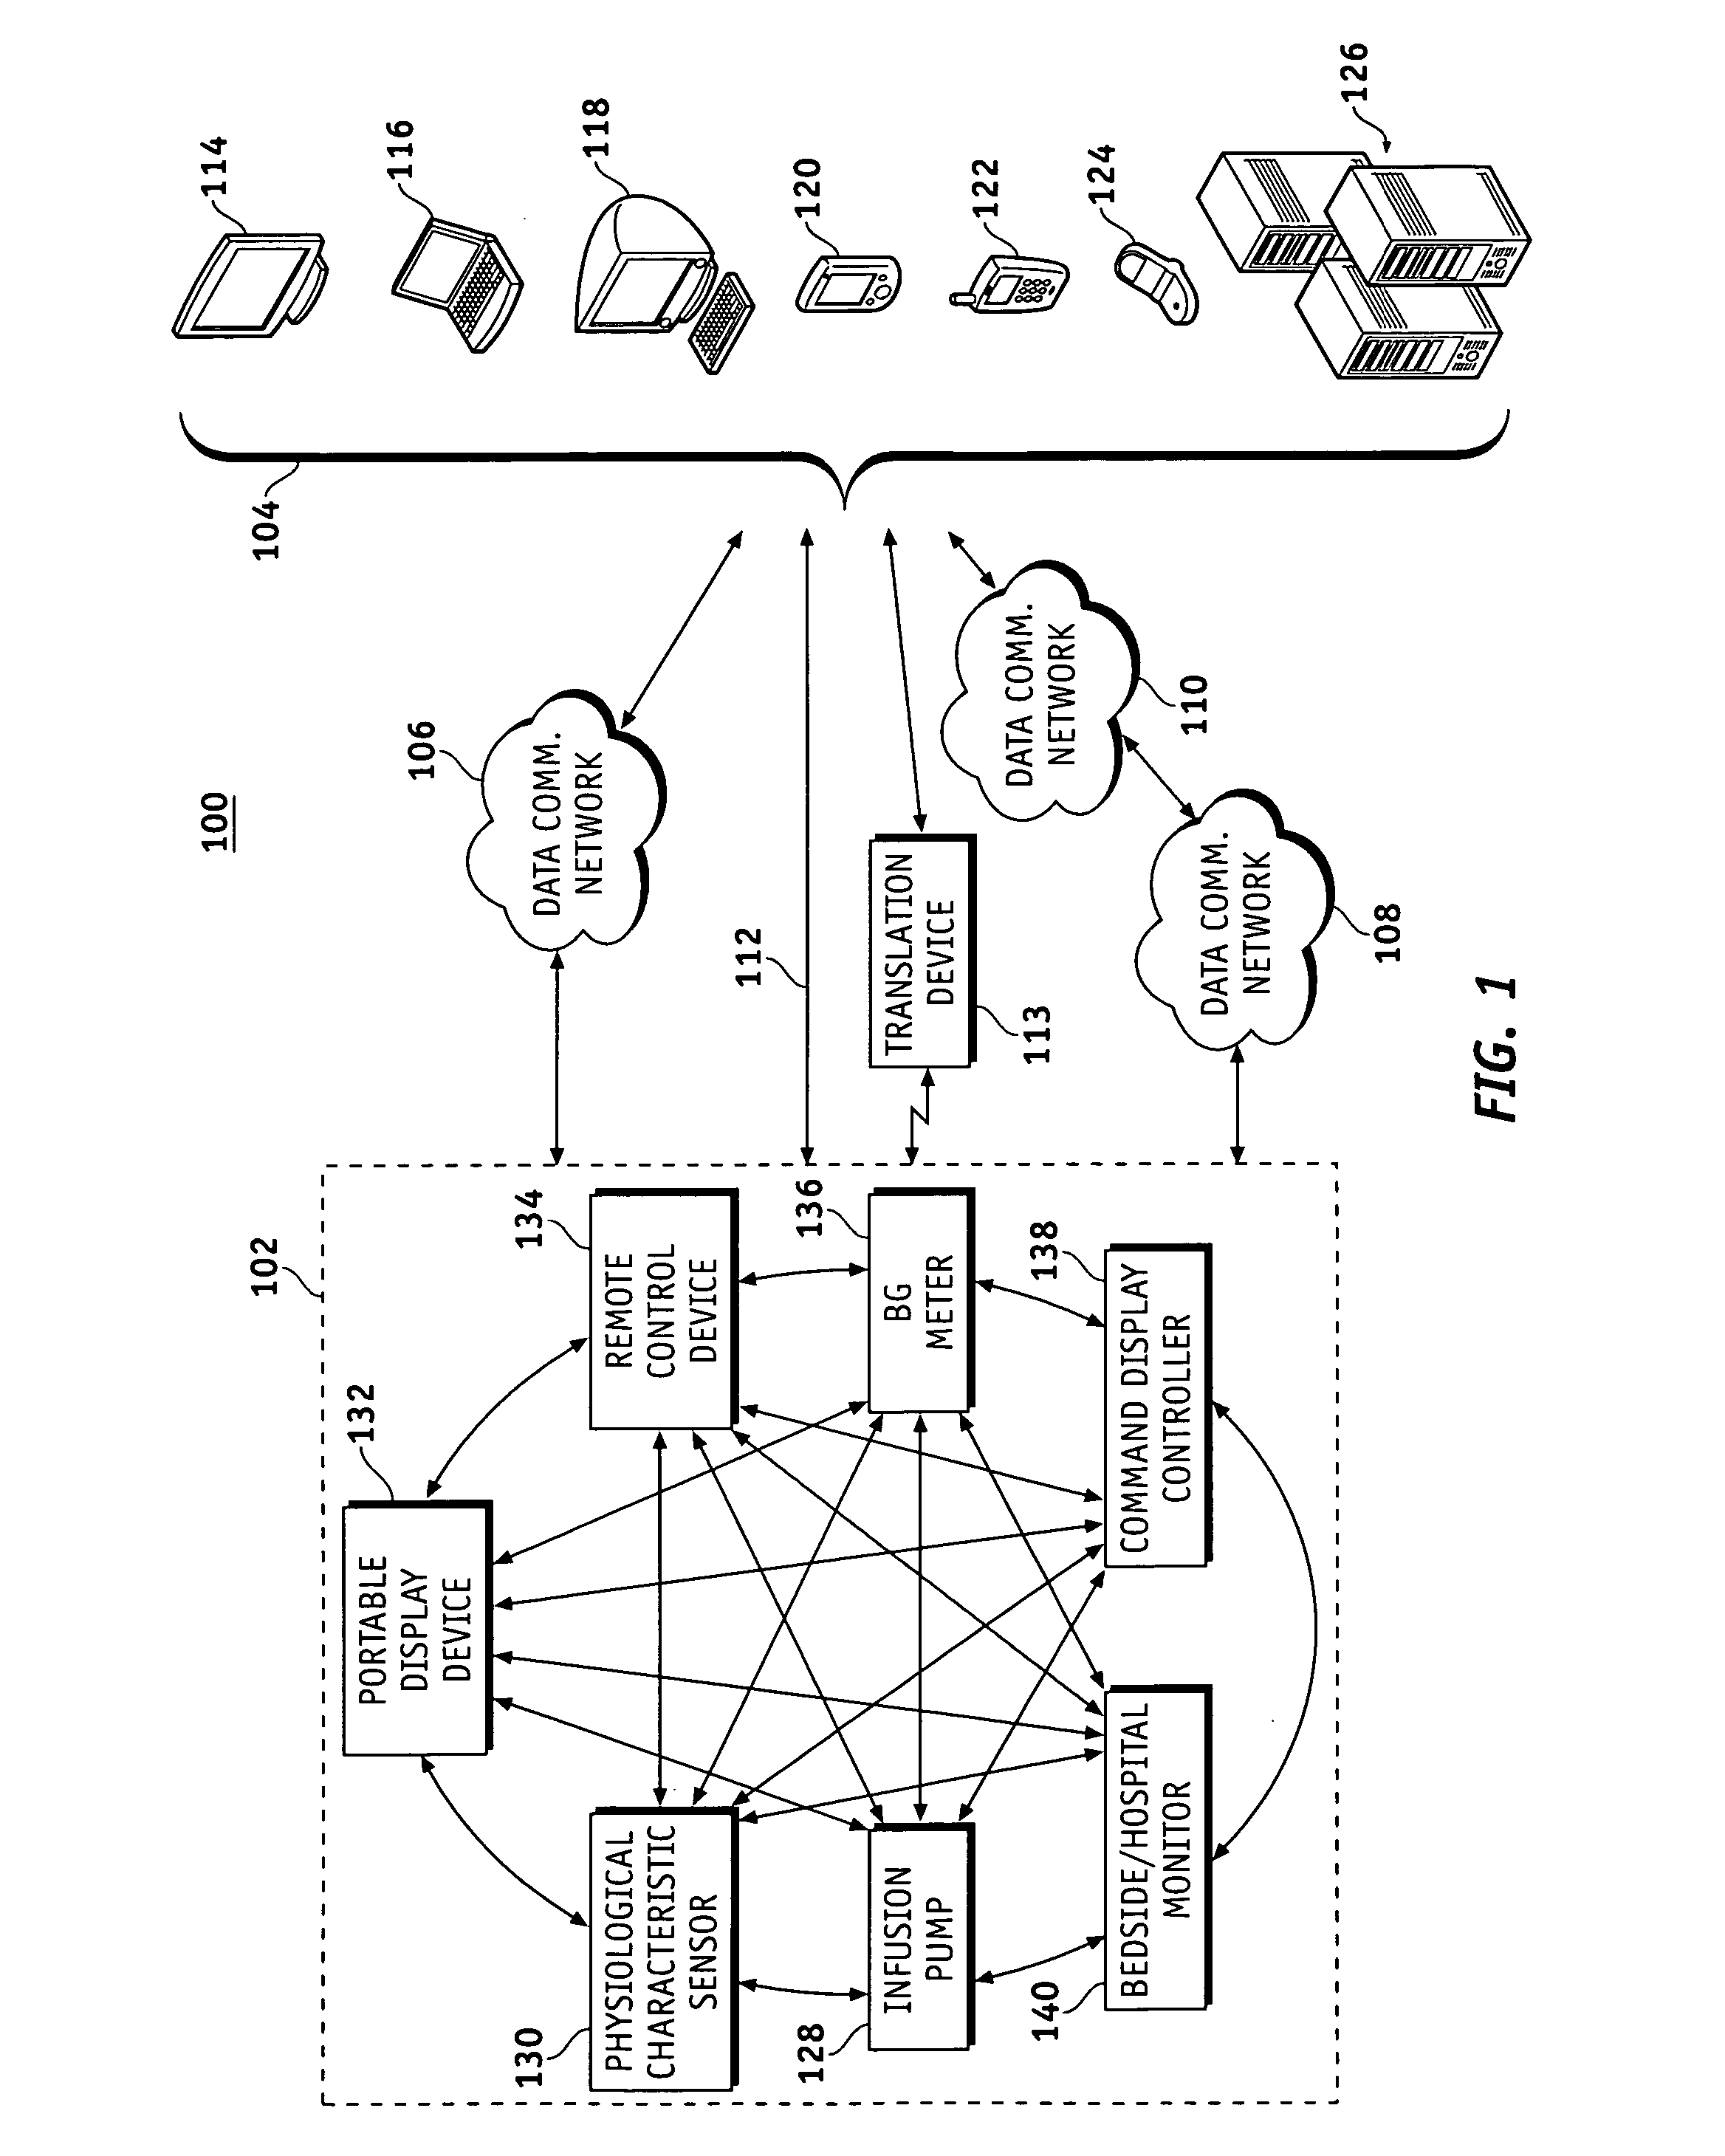 Monitor devices for networked fluid infusion systems